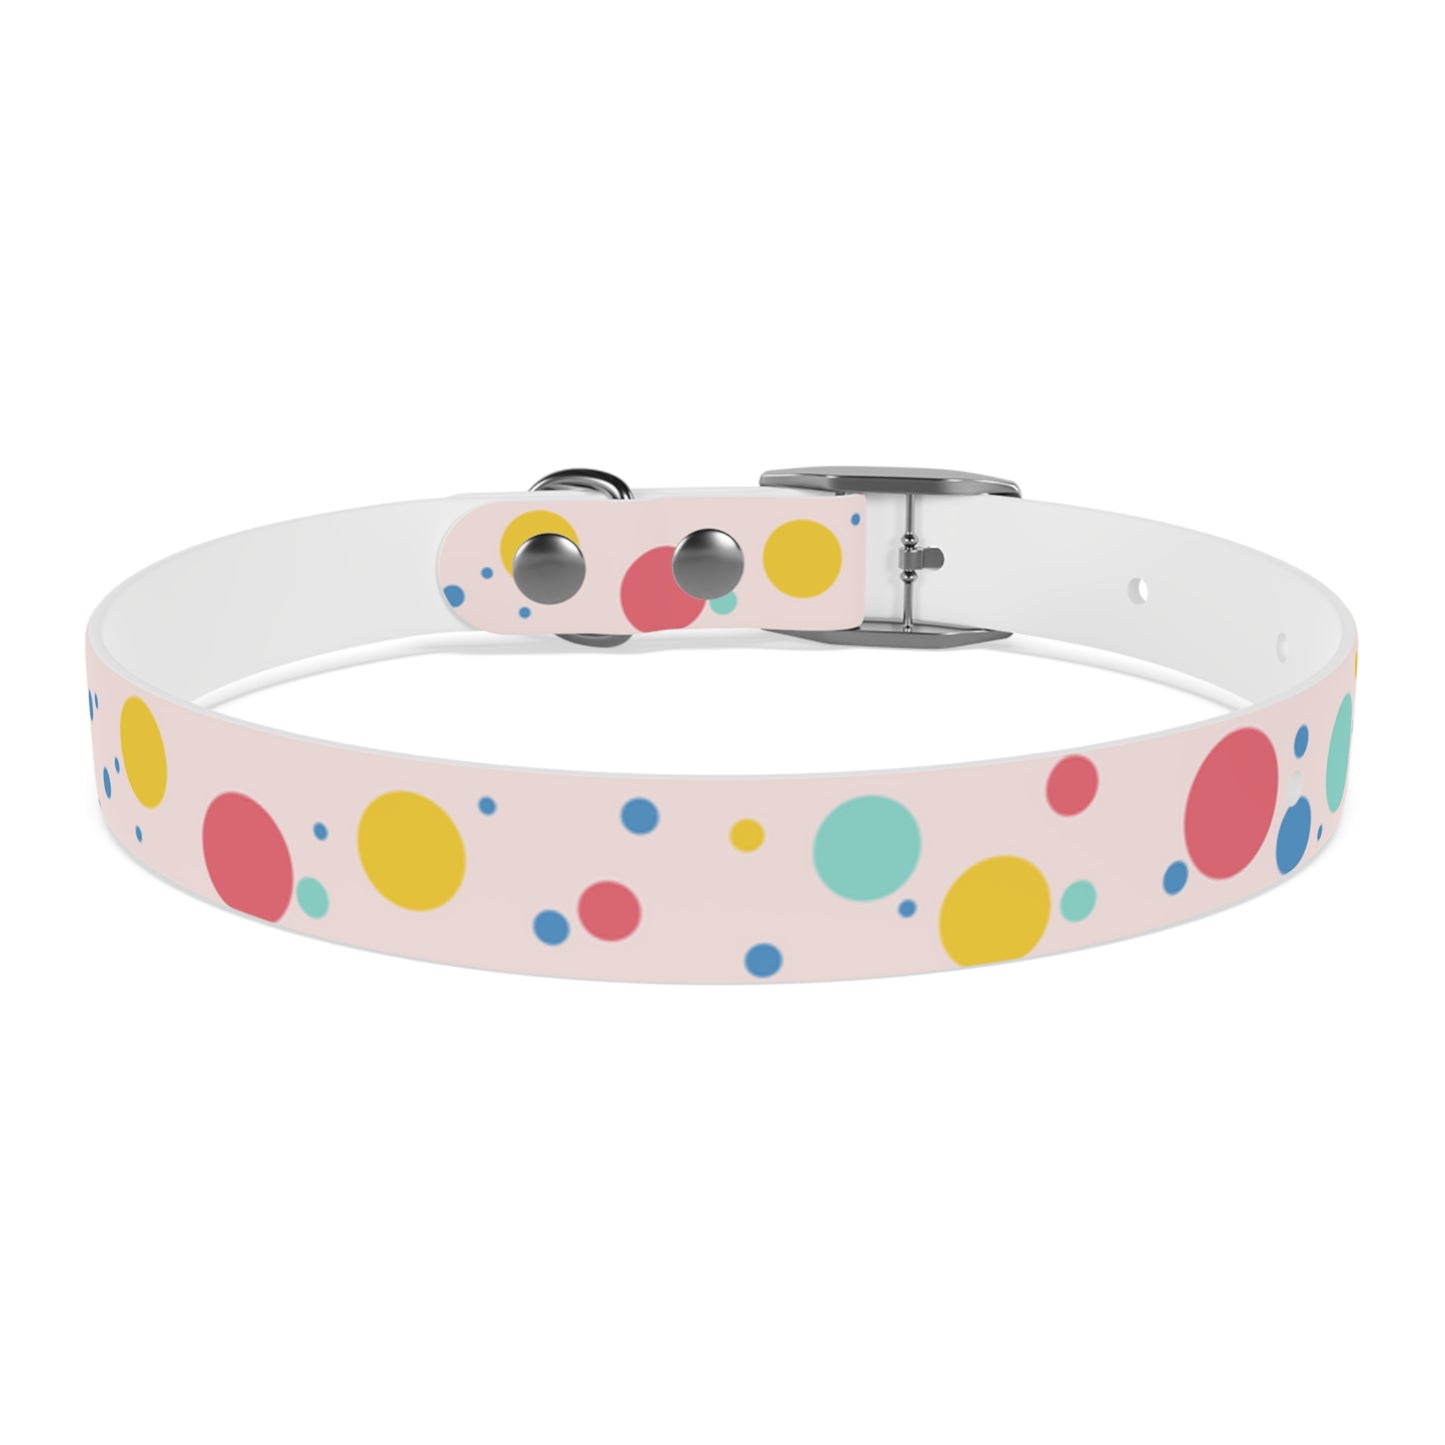 Pawlished PolkaDot Hypoallergenic Pup Dog Collar -Choose Size and Buckle Finish